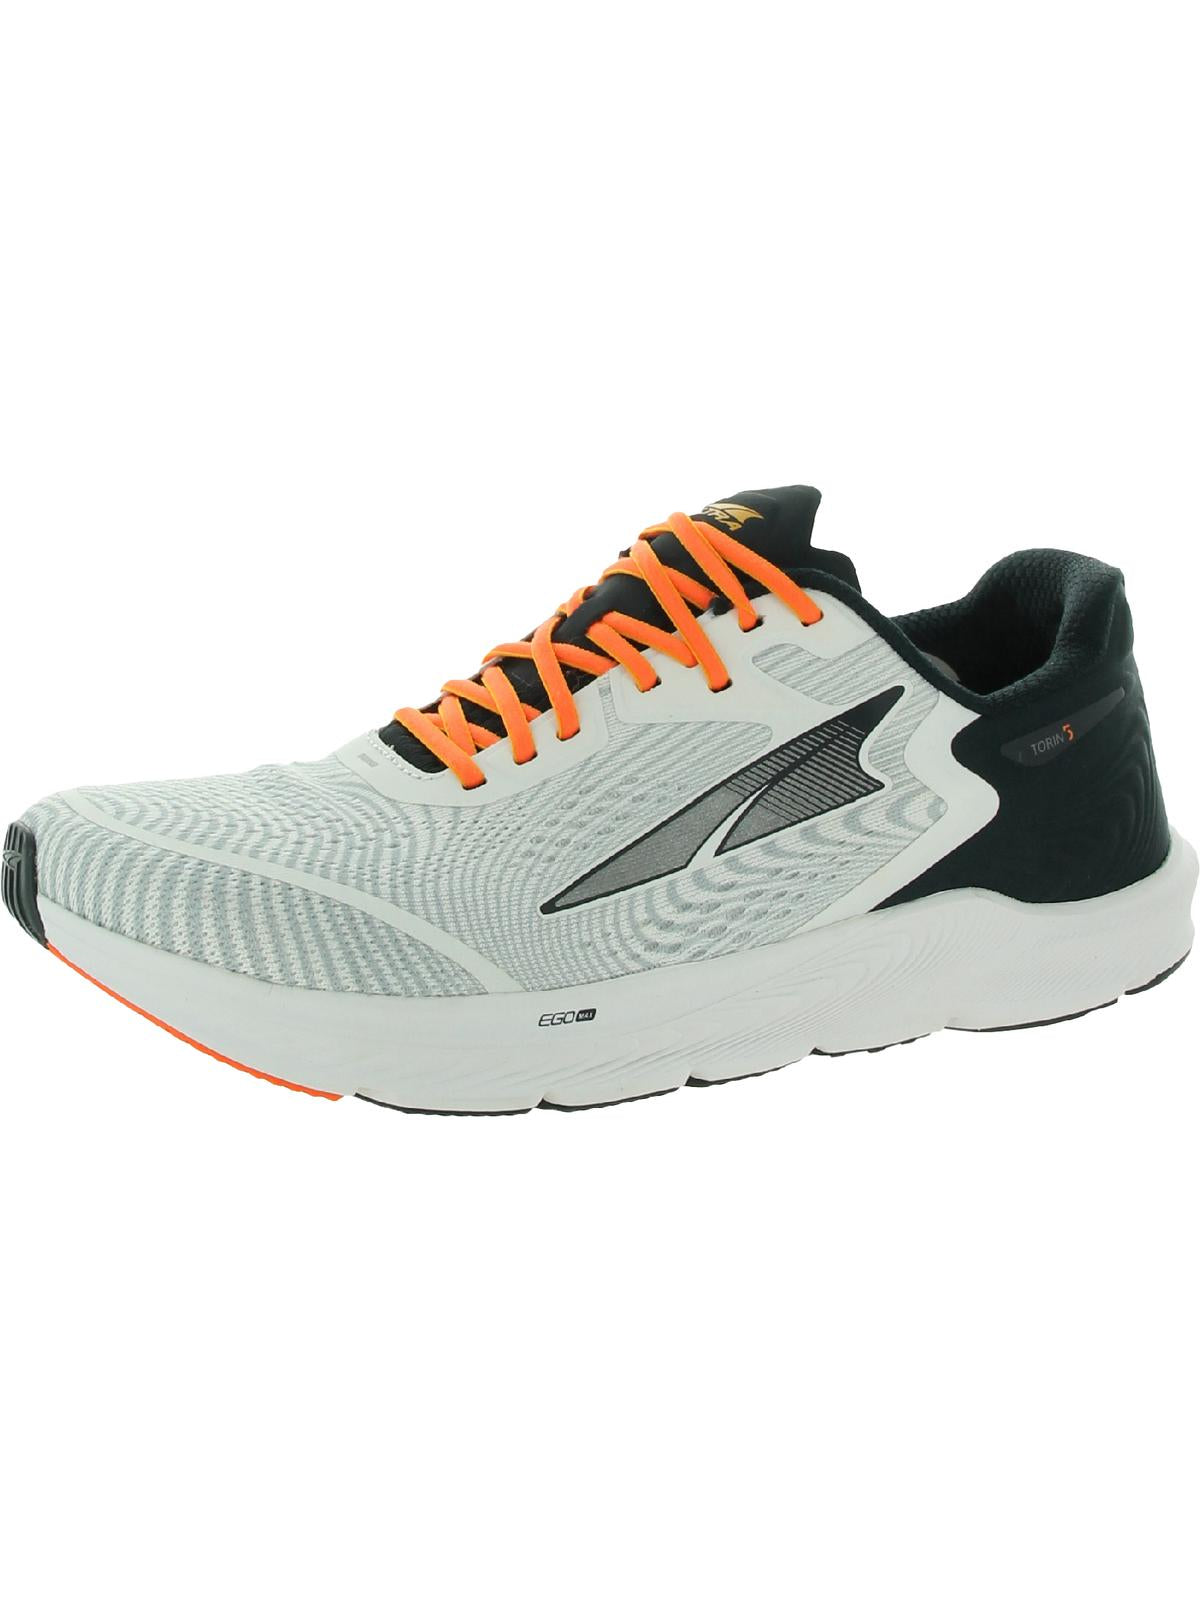 ALTRA Torin 5 Mens Fitness Lifestyle Running Shoes